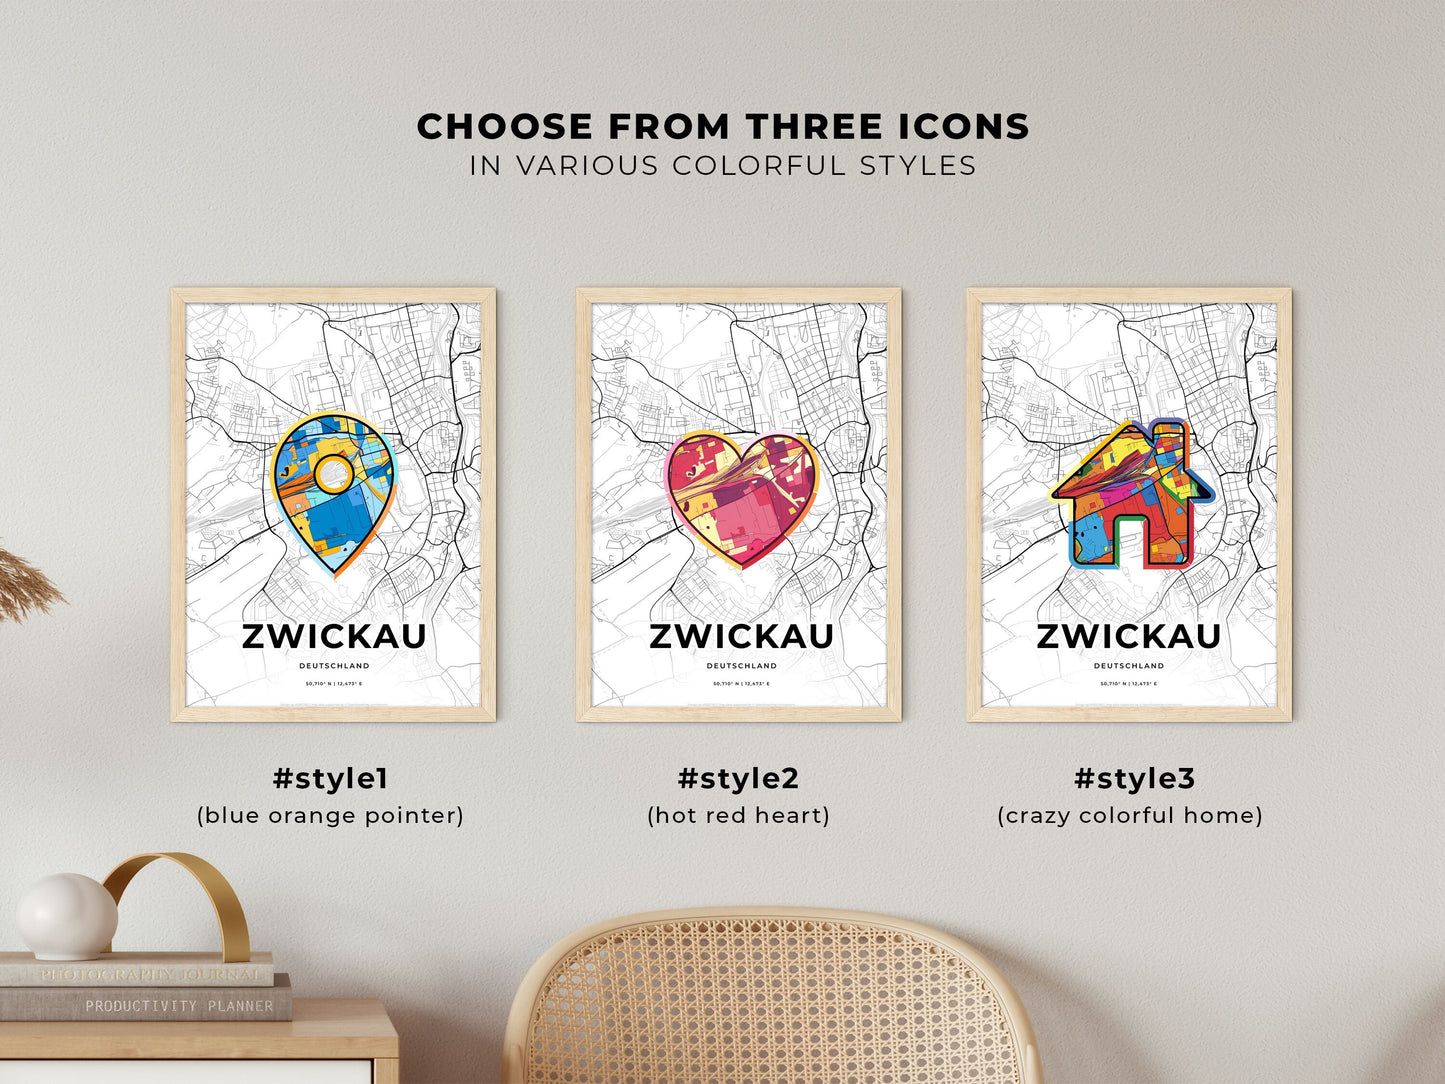 ZWICKAU GERMANY minimal art map with a colorful icon. Where it all began, Couple map gift.